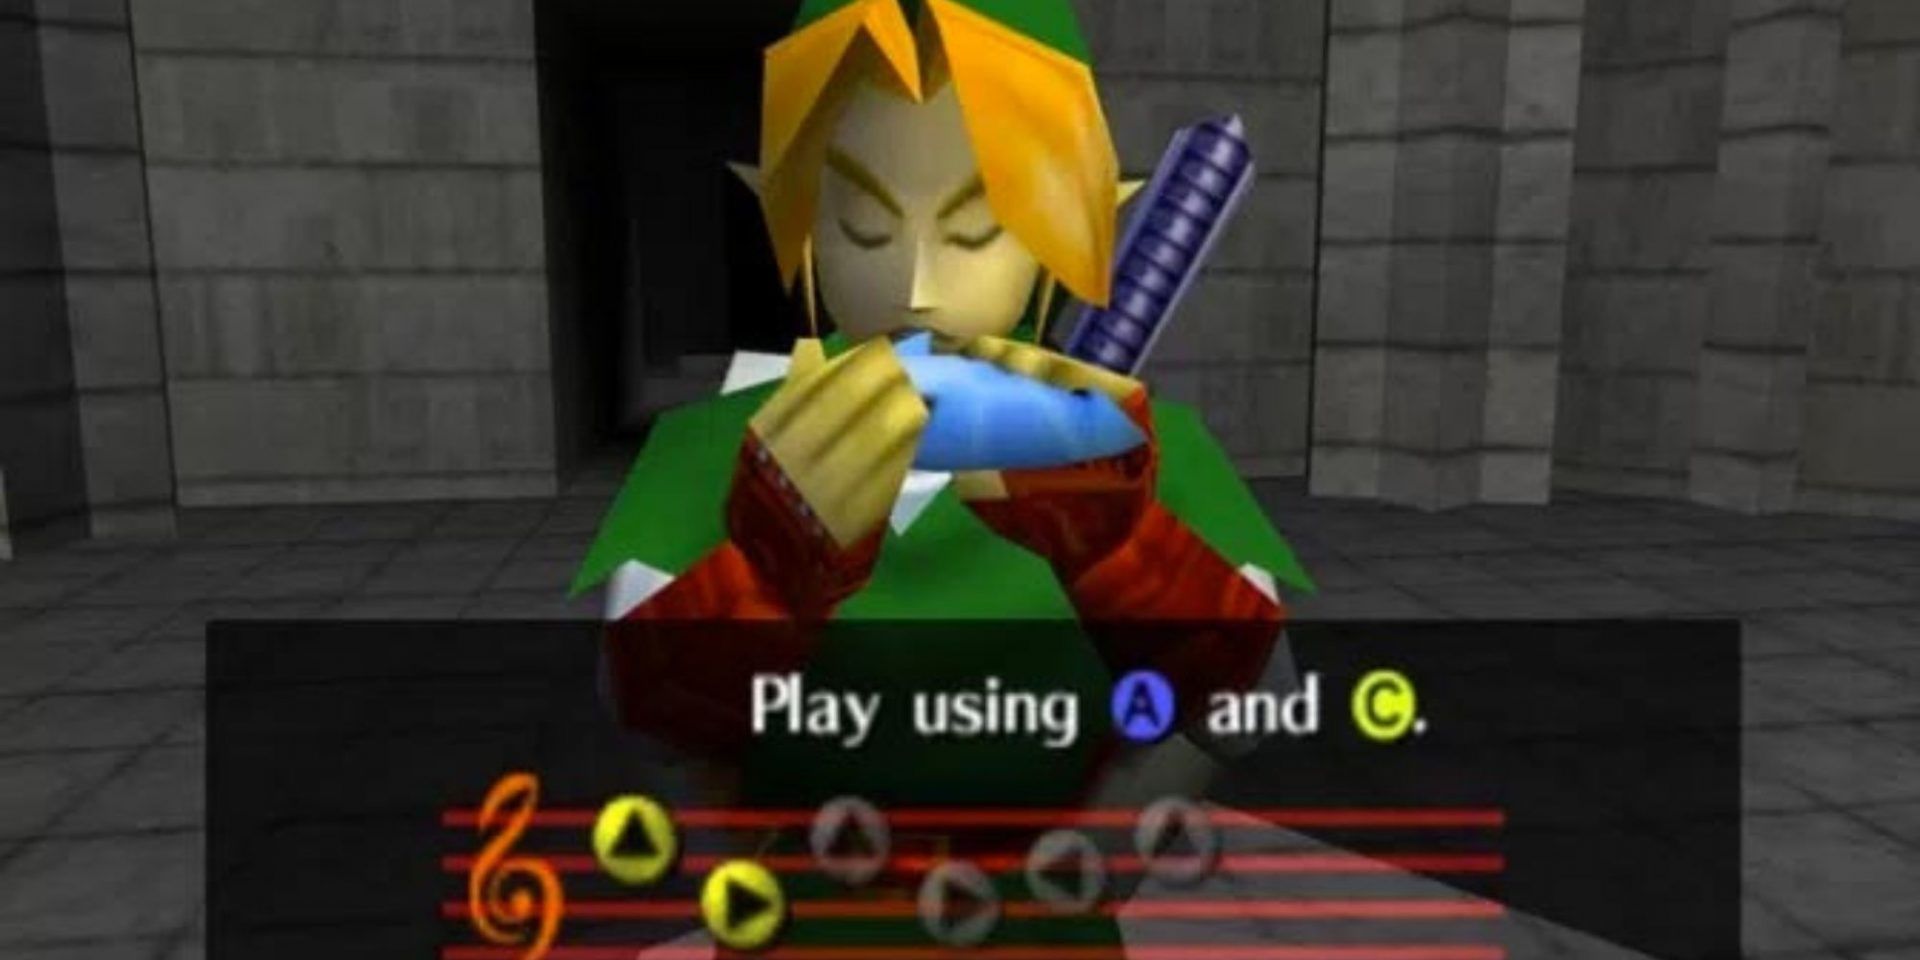 Link playing the Ocarina